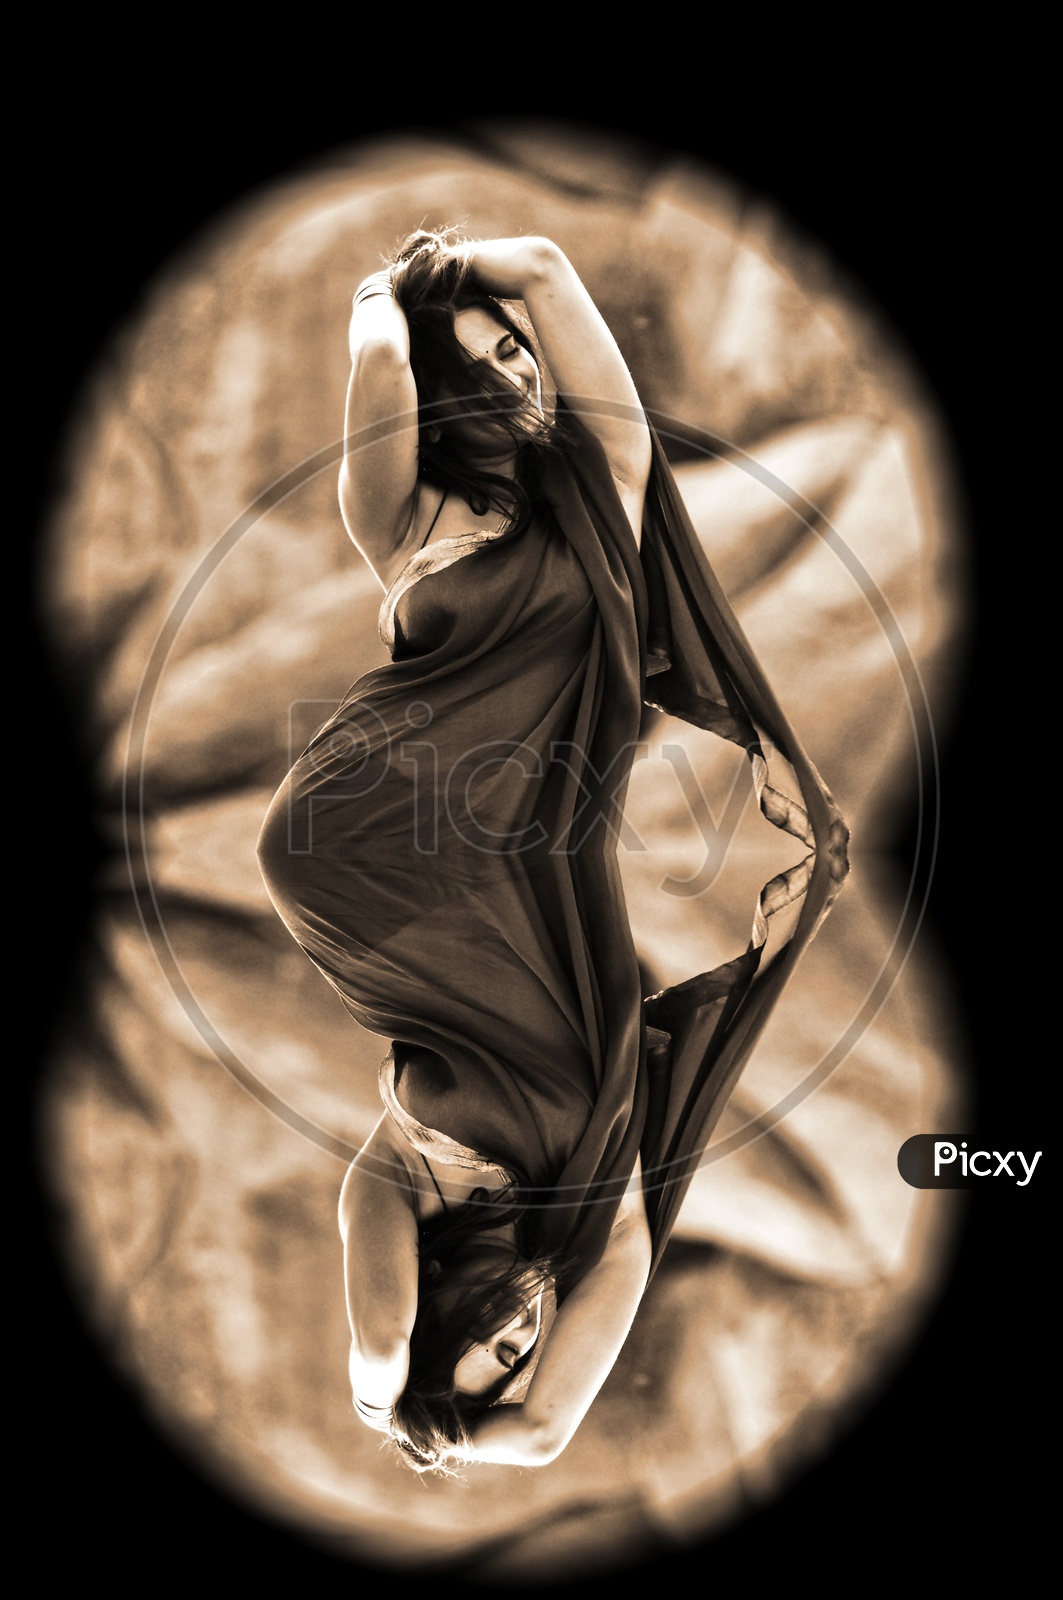 Optical illusion of dance pose of a woman in saree